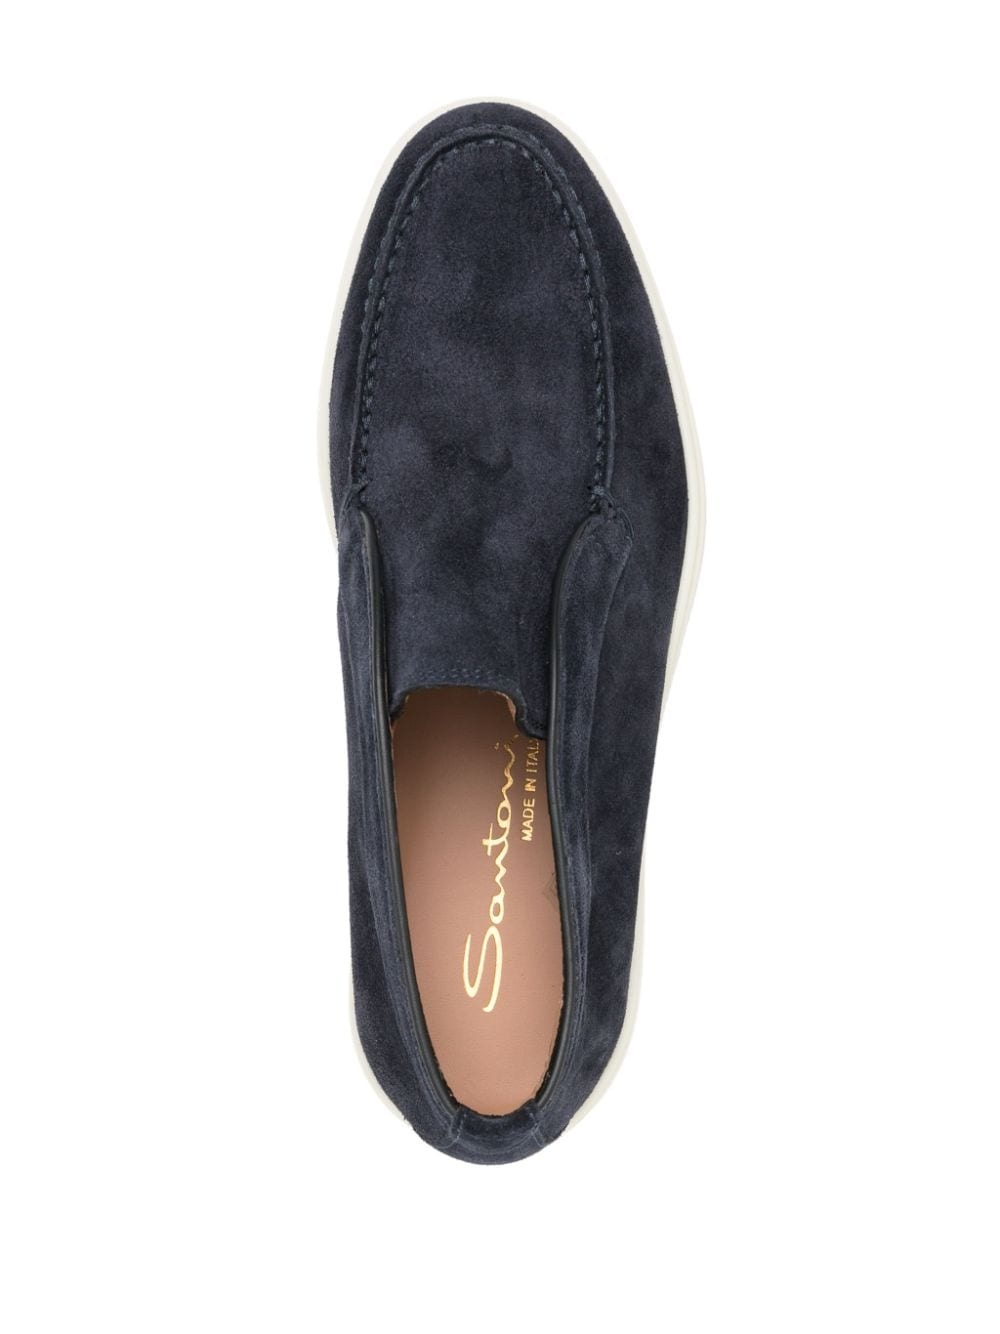 suede flat loafers - 4